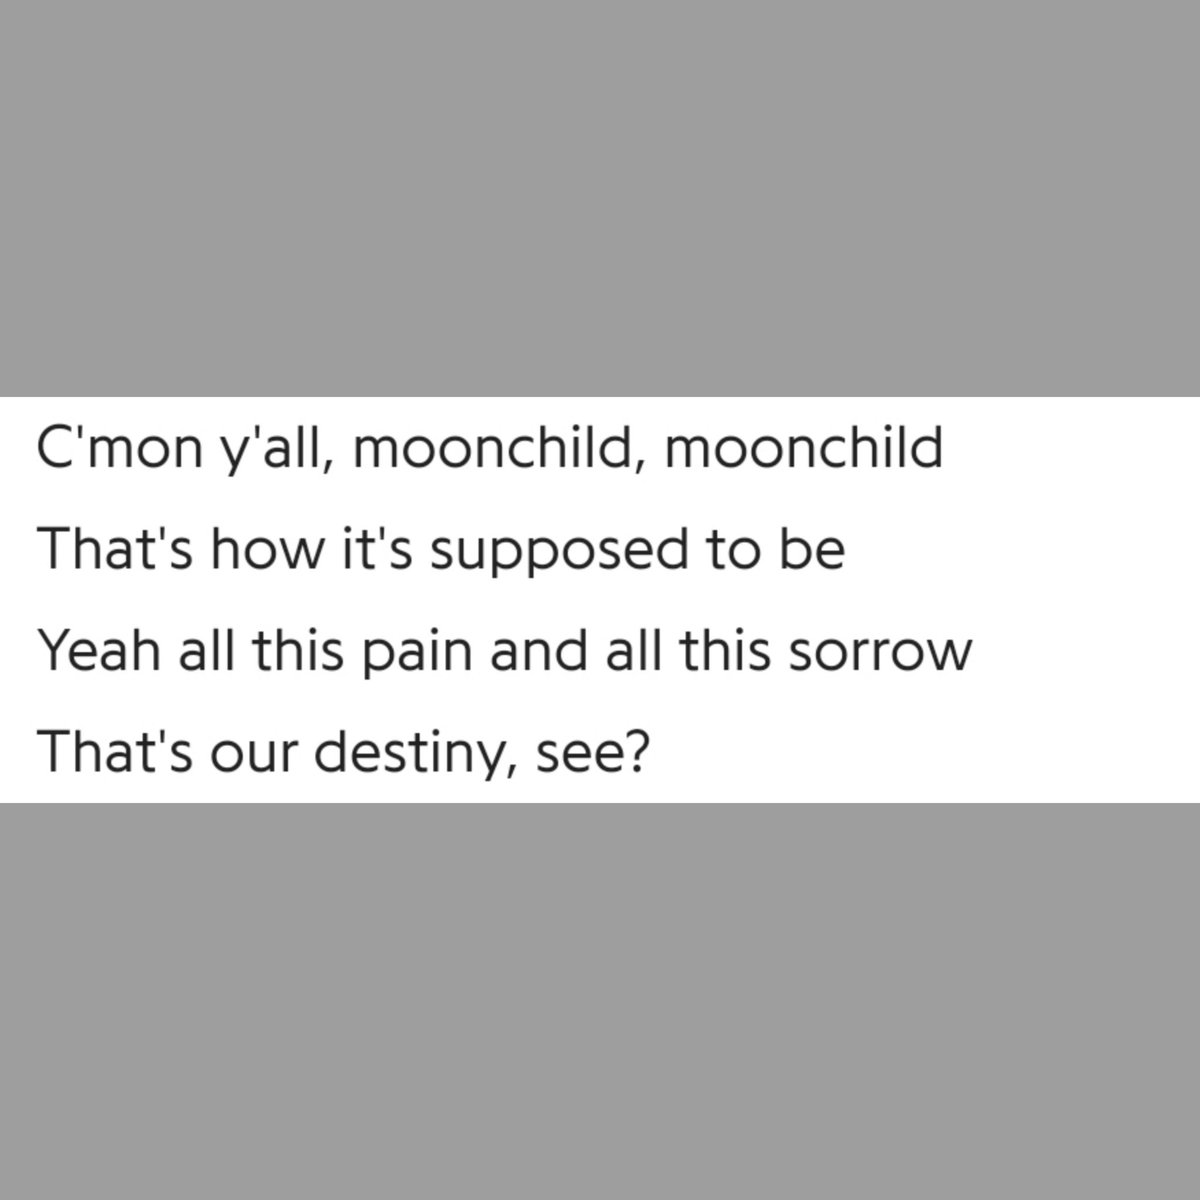 Perpetual darkness of our lives n glow, just like the moon at night. He addresses us "moonchild"s, stating how our (us n joon's) lives r supposed to be filled w pain n sorrow as those are a part n parcel of our destiny, we r stuck in this labyrinth of suffering n sorrow for all+